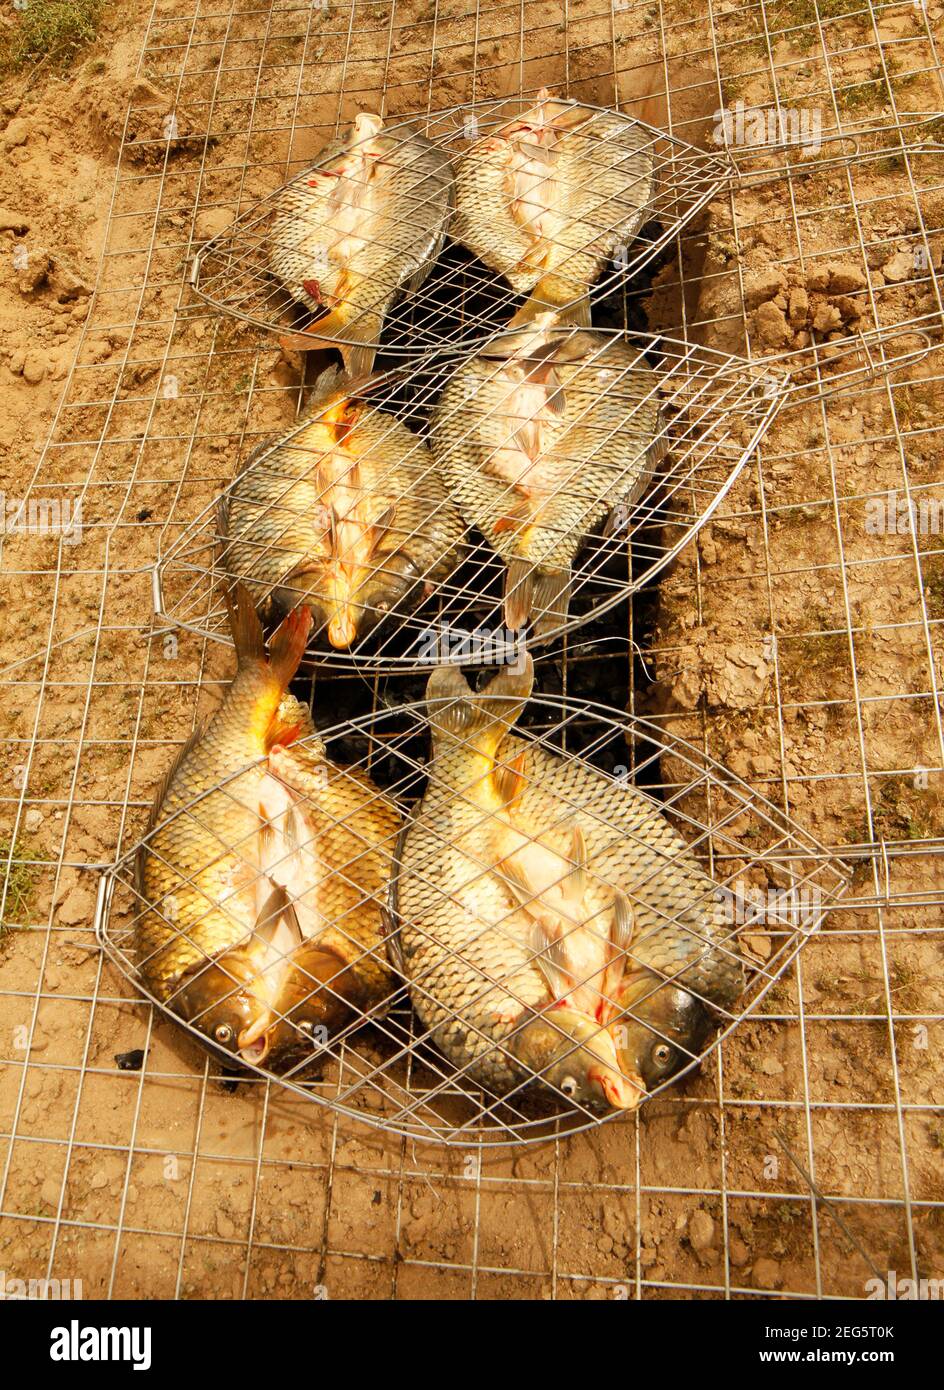 Iraqi grilled fish masgouf, national dish of Iraq, cooked in a simple earth oven with a clamshell grill. Stock Photo